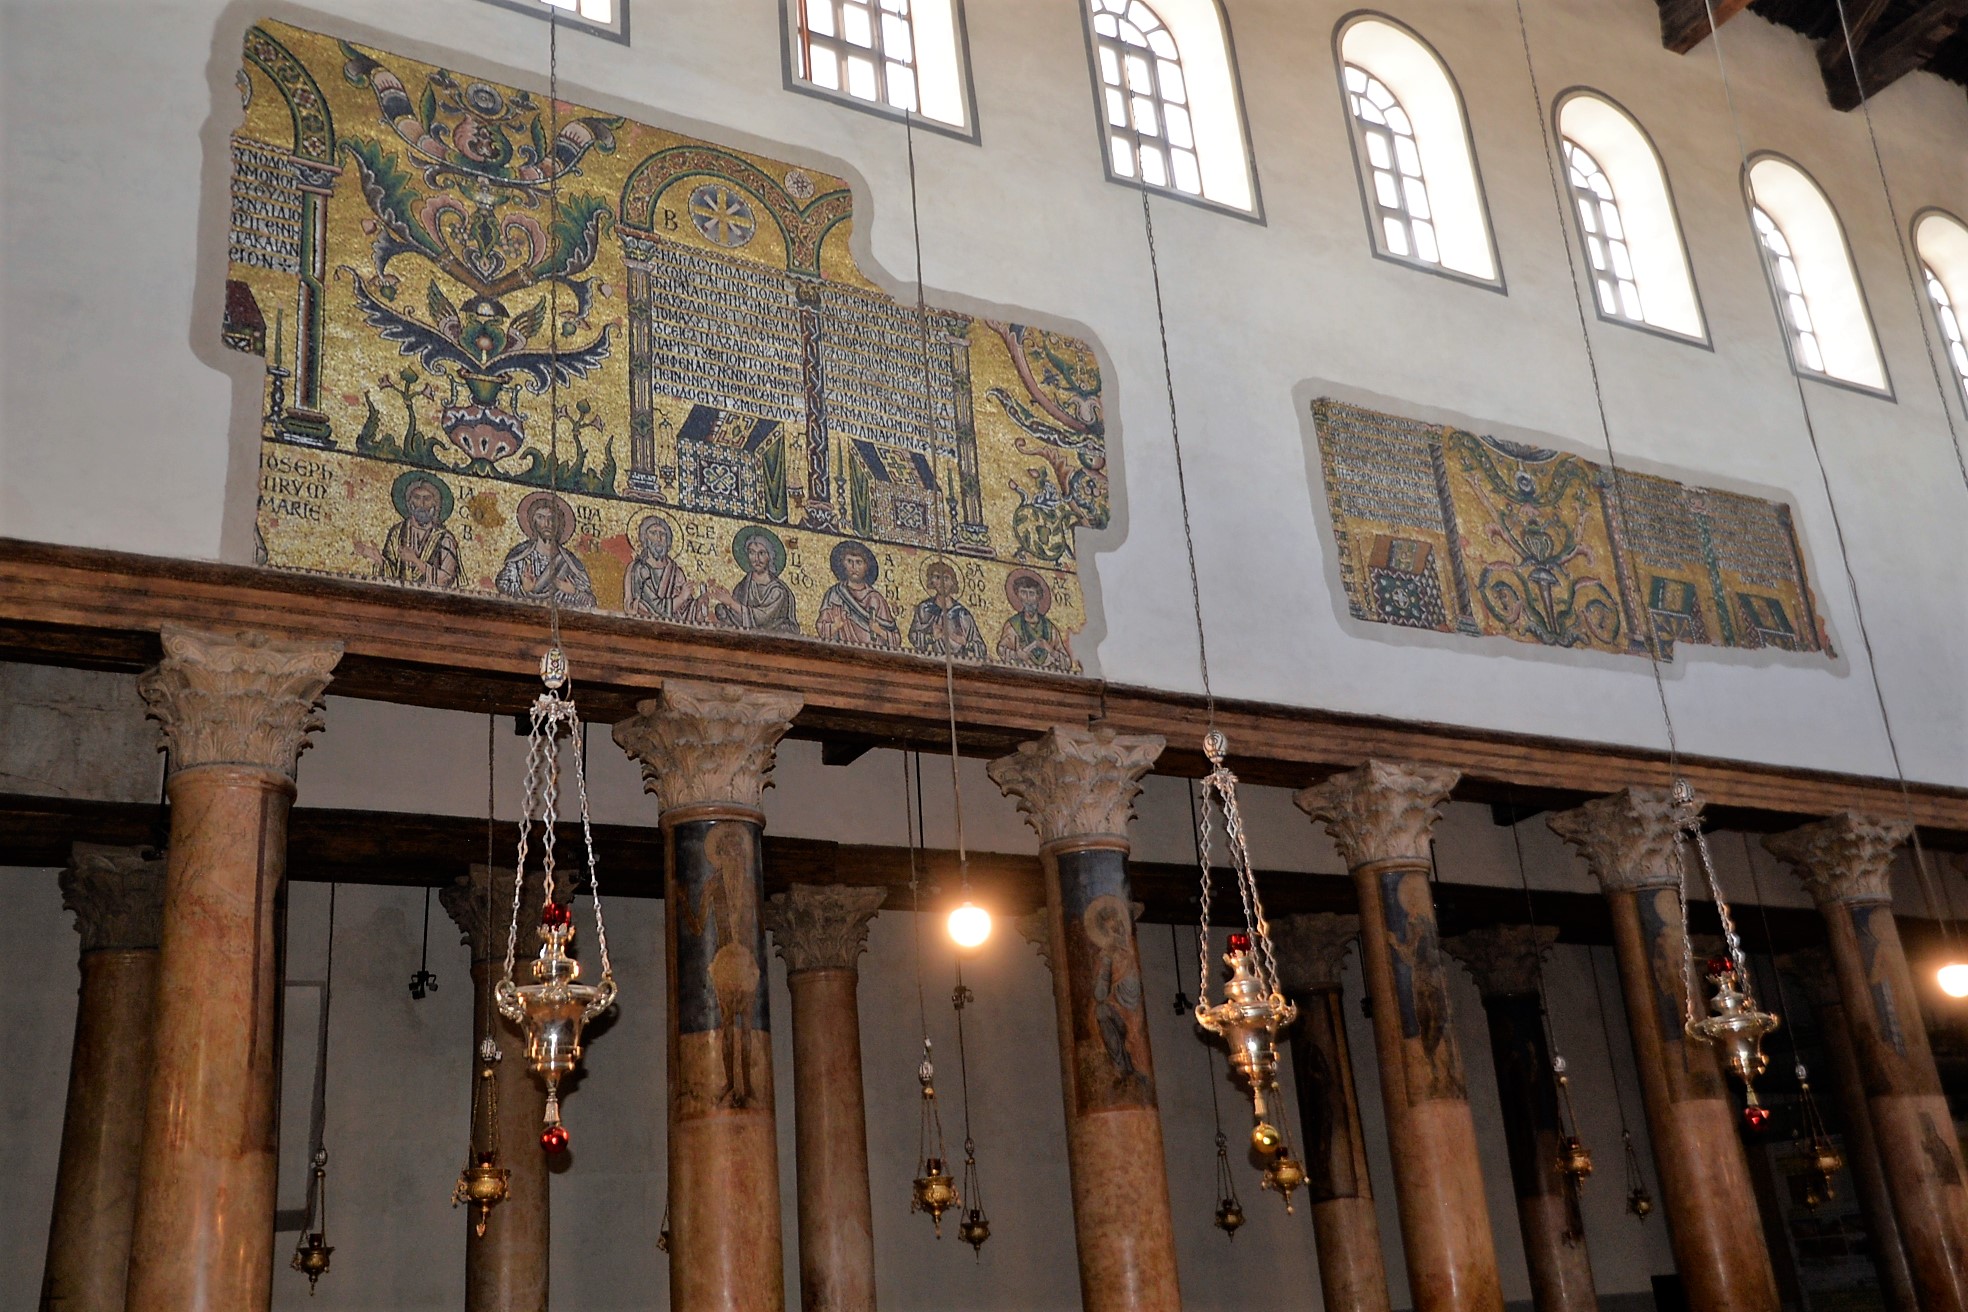 The mosaics high on the walls have been restored.